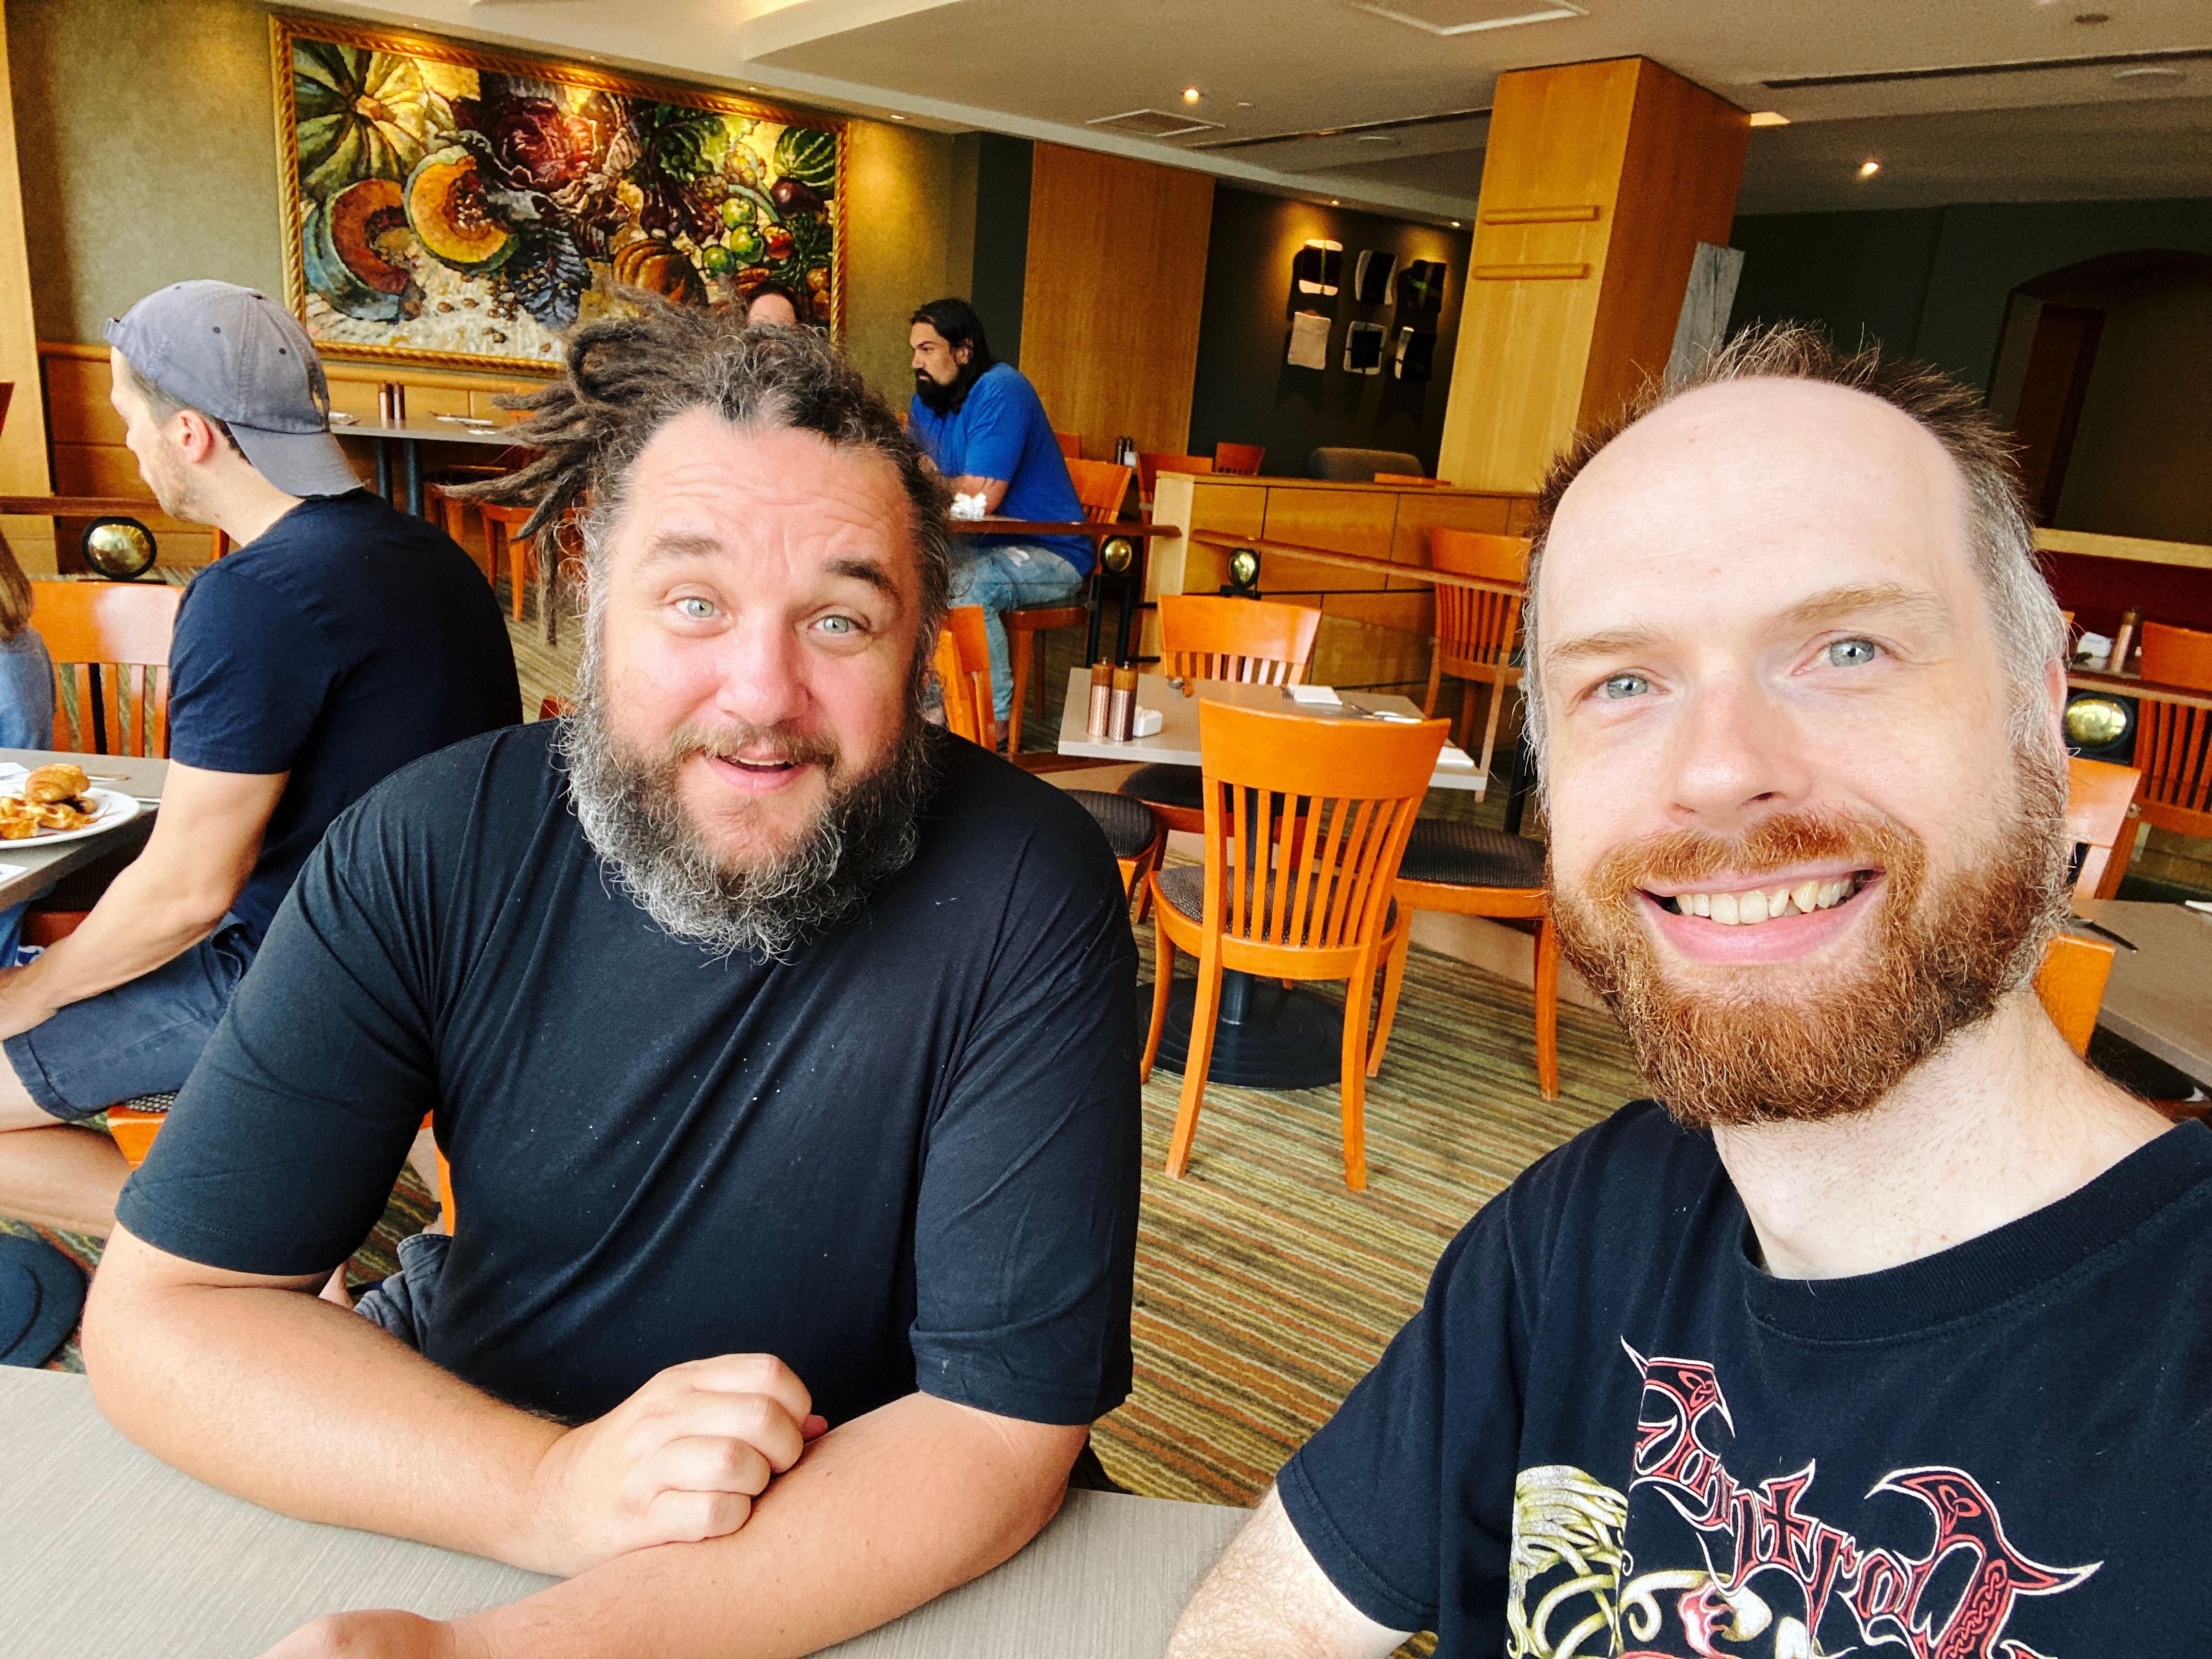 A photo of two white men (me, with a red beard streaked with grey that's getting to be in desperate need of a trim, and my friend who also has a scruffy beard streaked with grey, but his is a very dark brown bordering on black) smiling at the camera.